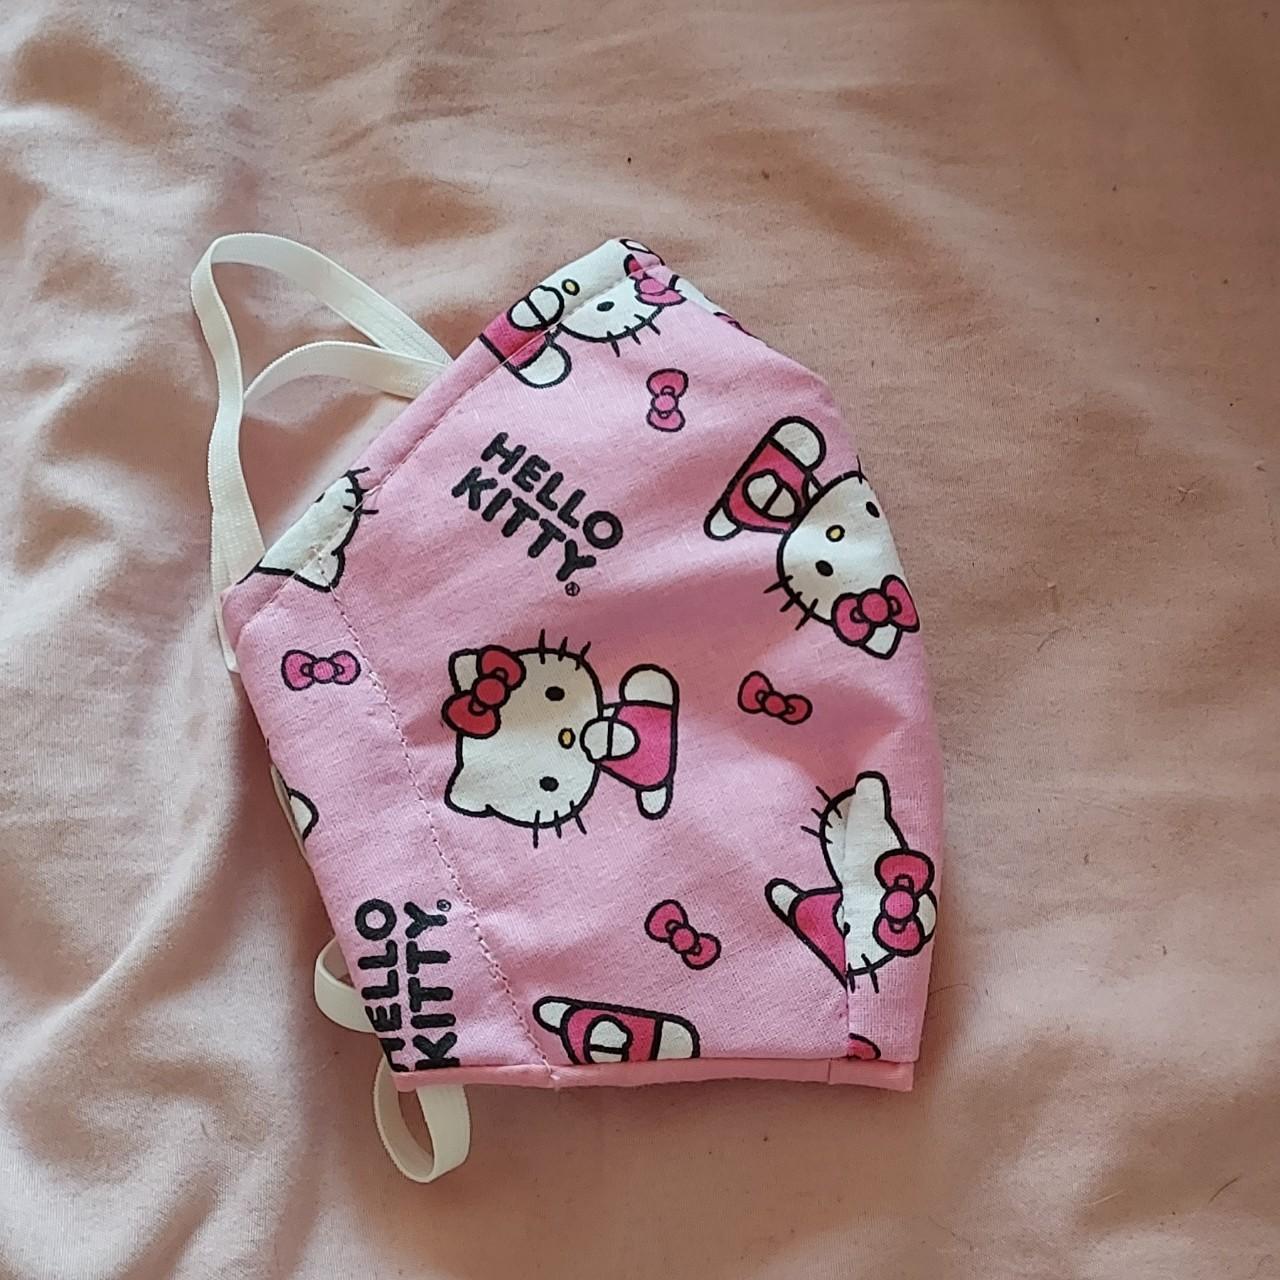 Pink Hello Kitty Louie Vuitton face mask cover 💕 - Depop